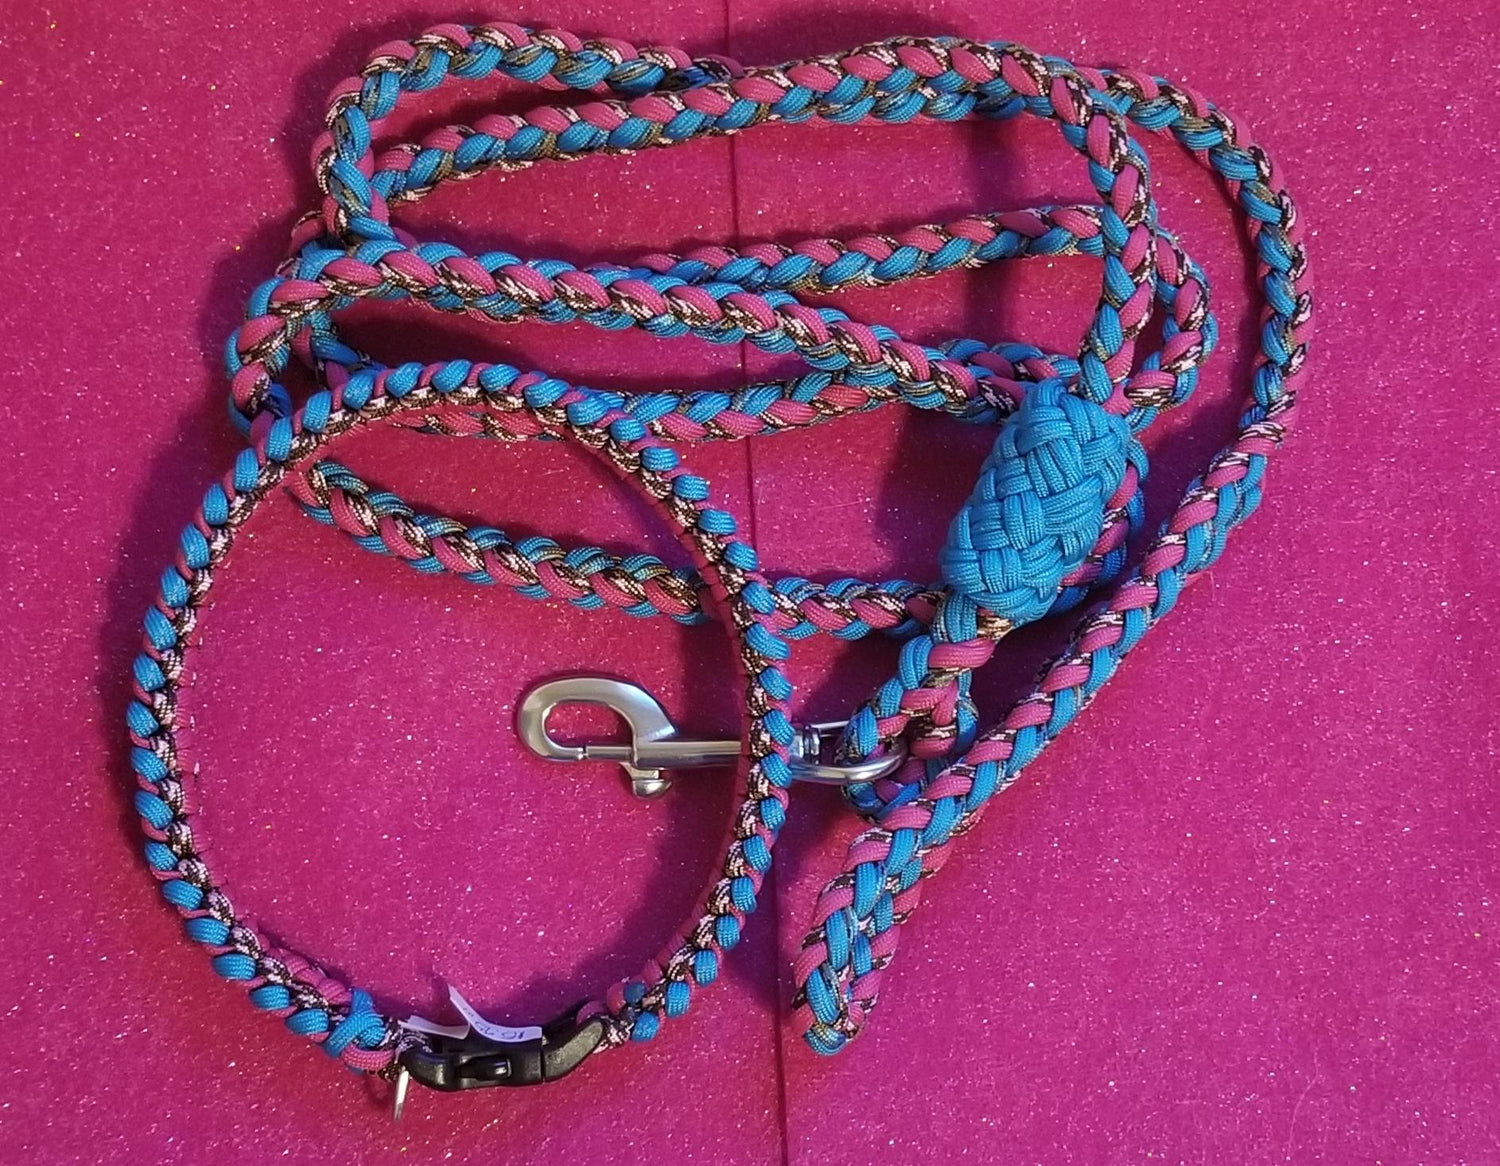 Collar and Leash Sets